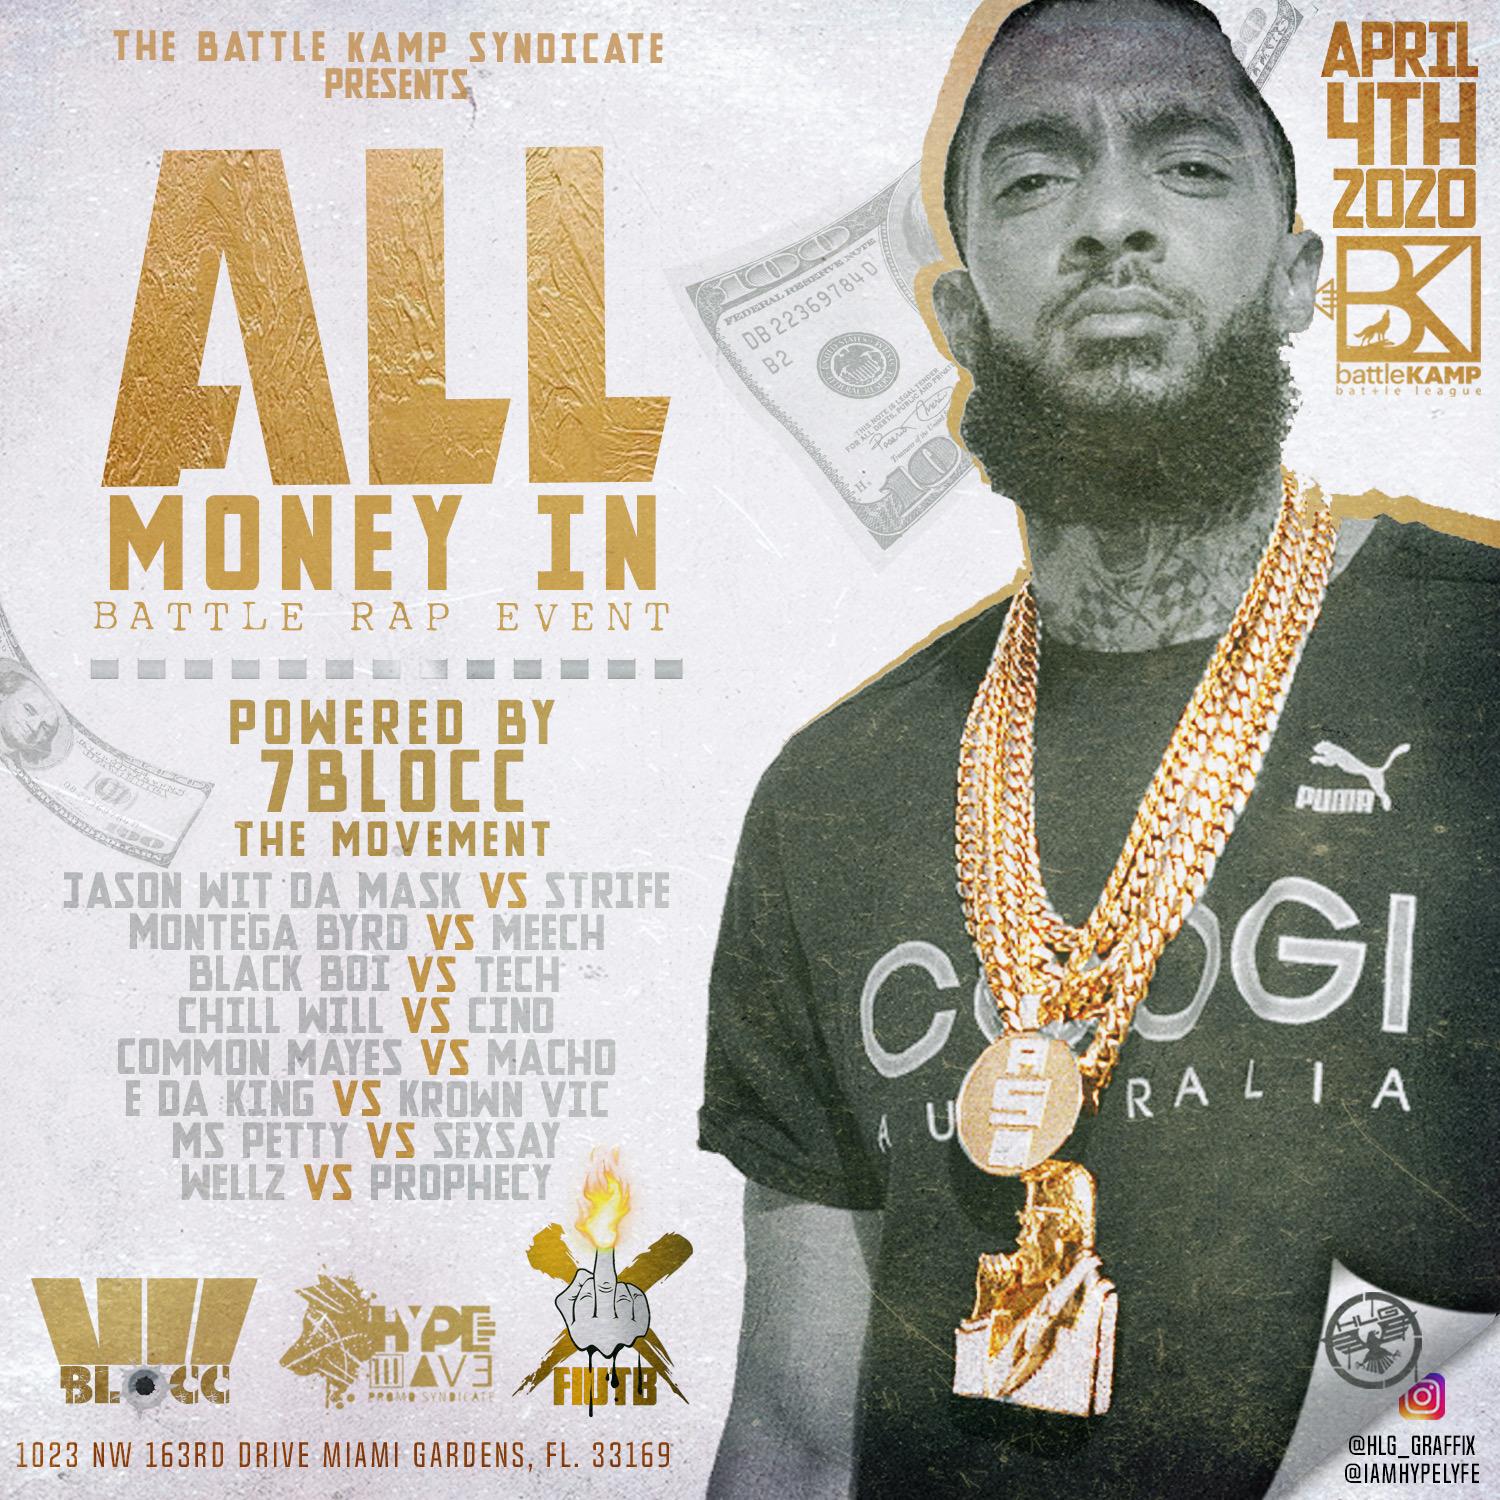 Battle Kamp Presents “All Money In” Powered by 7blocc The Movement